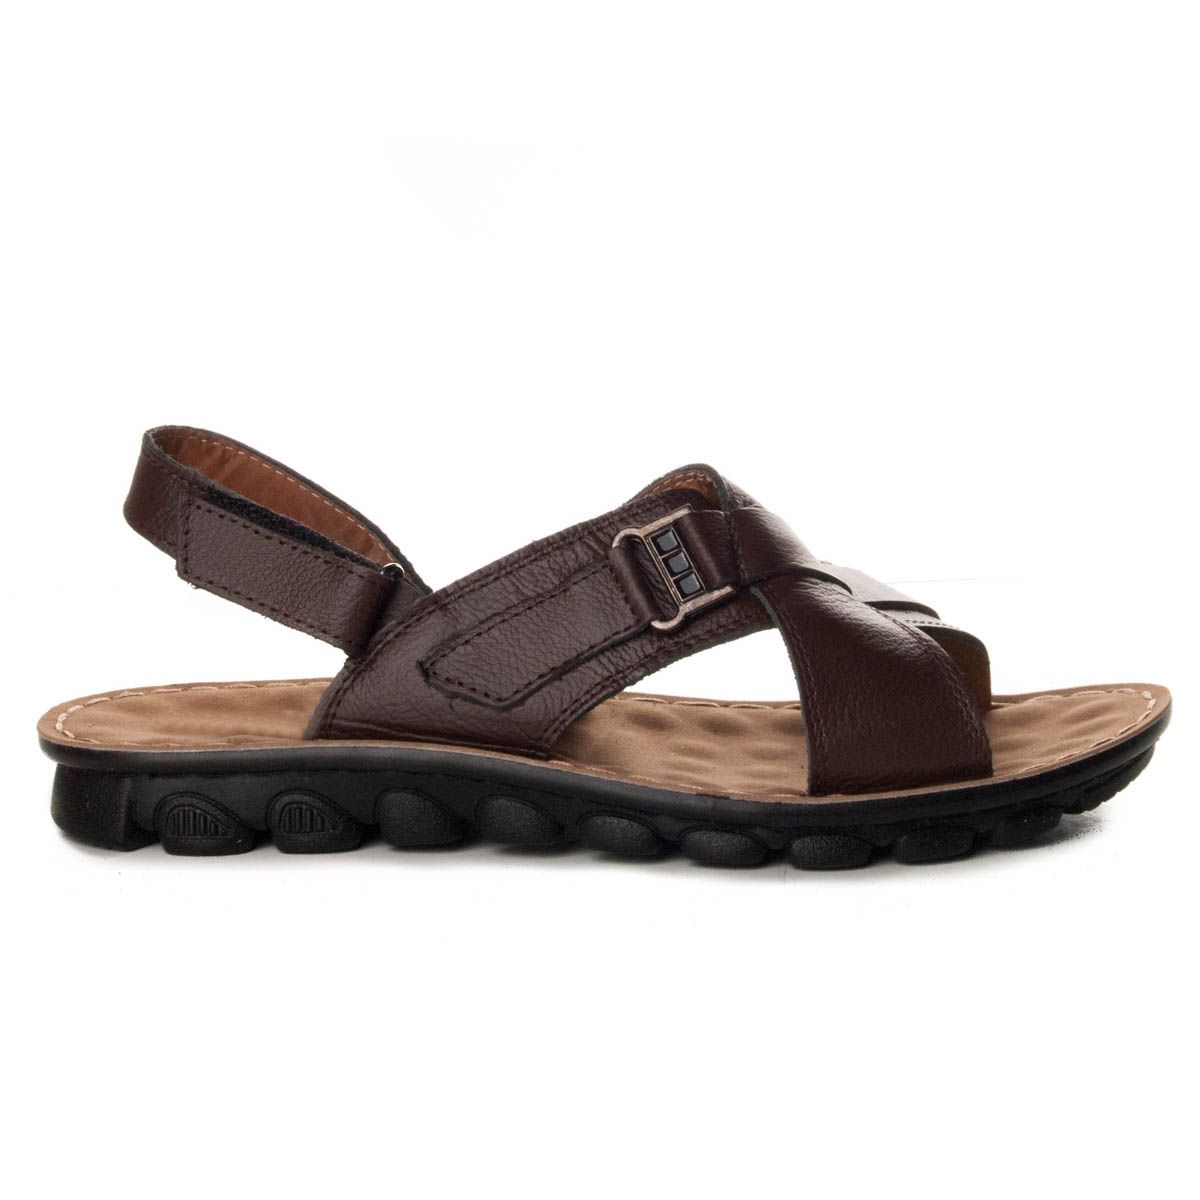 Skin, Skin, Strip Sandal. Stitched and very comfortable for being so flexible and light. Fastened on the ankle. A very stylish sandal by the choice of its materials and colors, which is trend this summer.